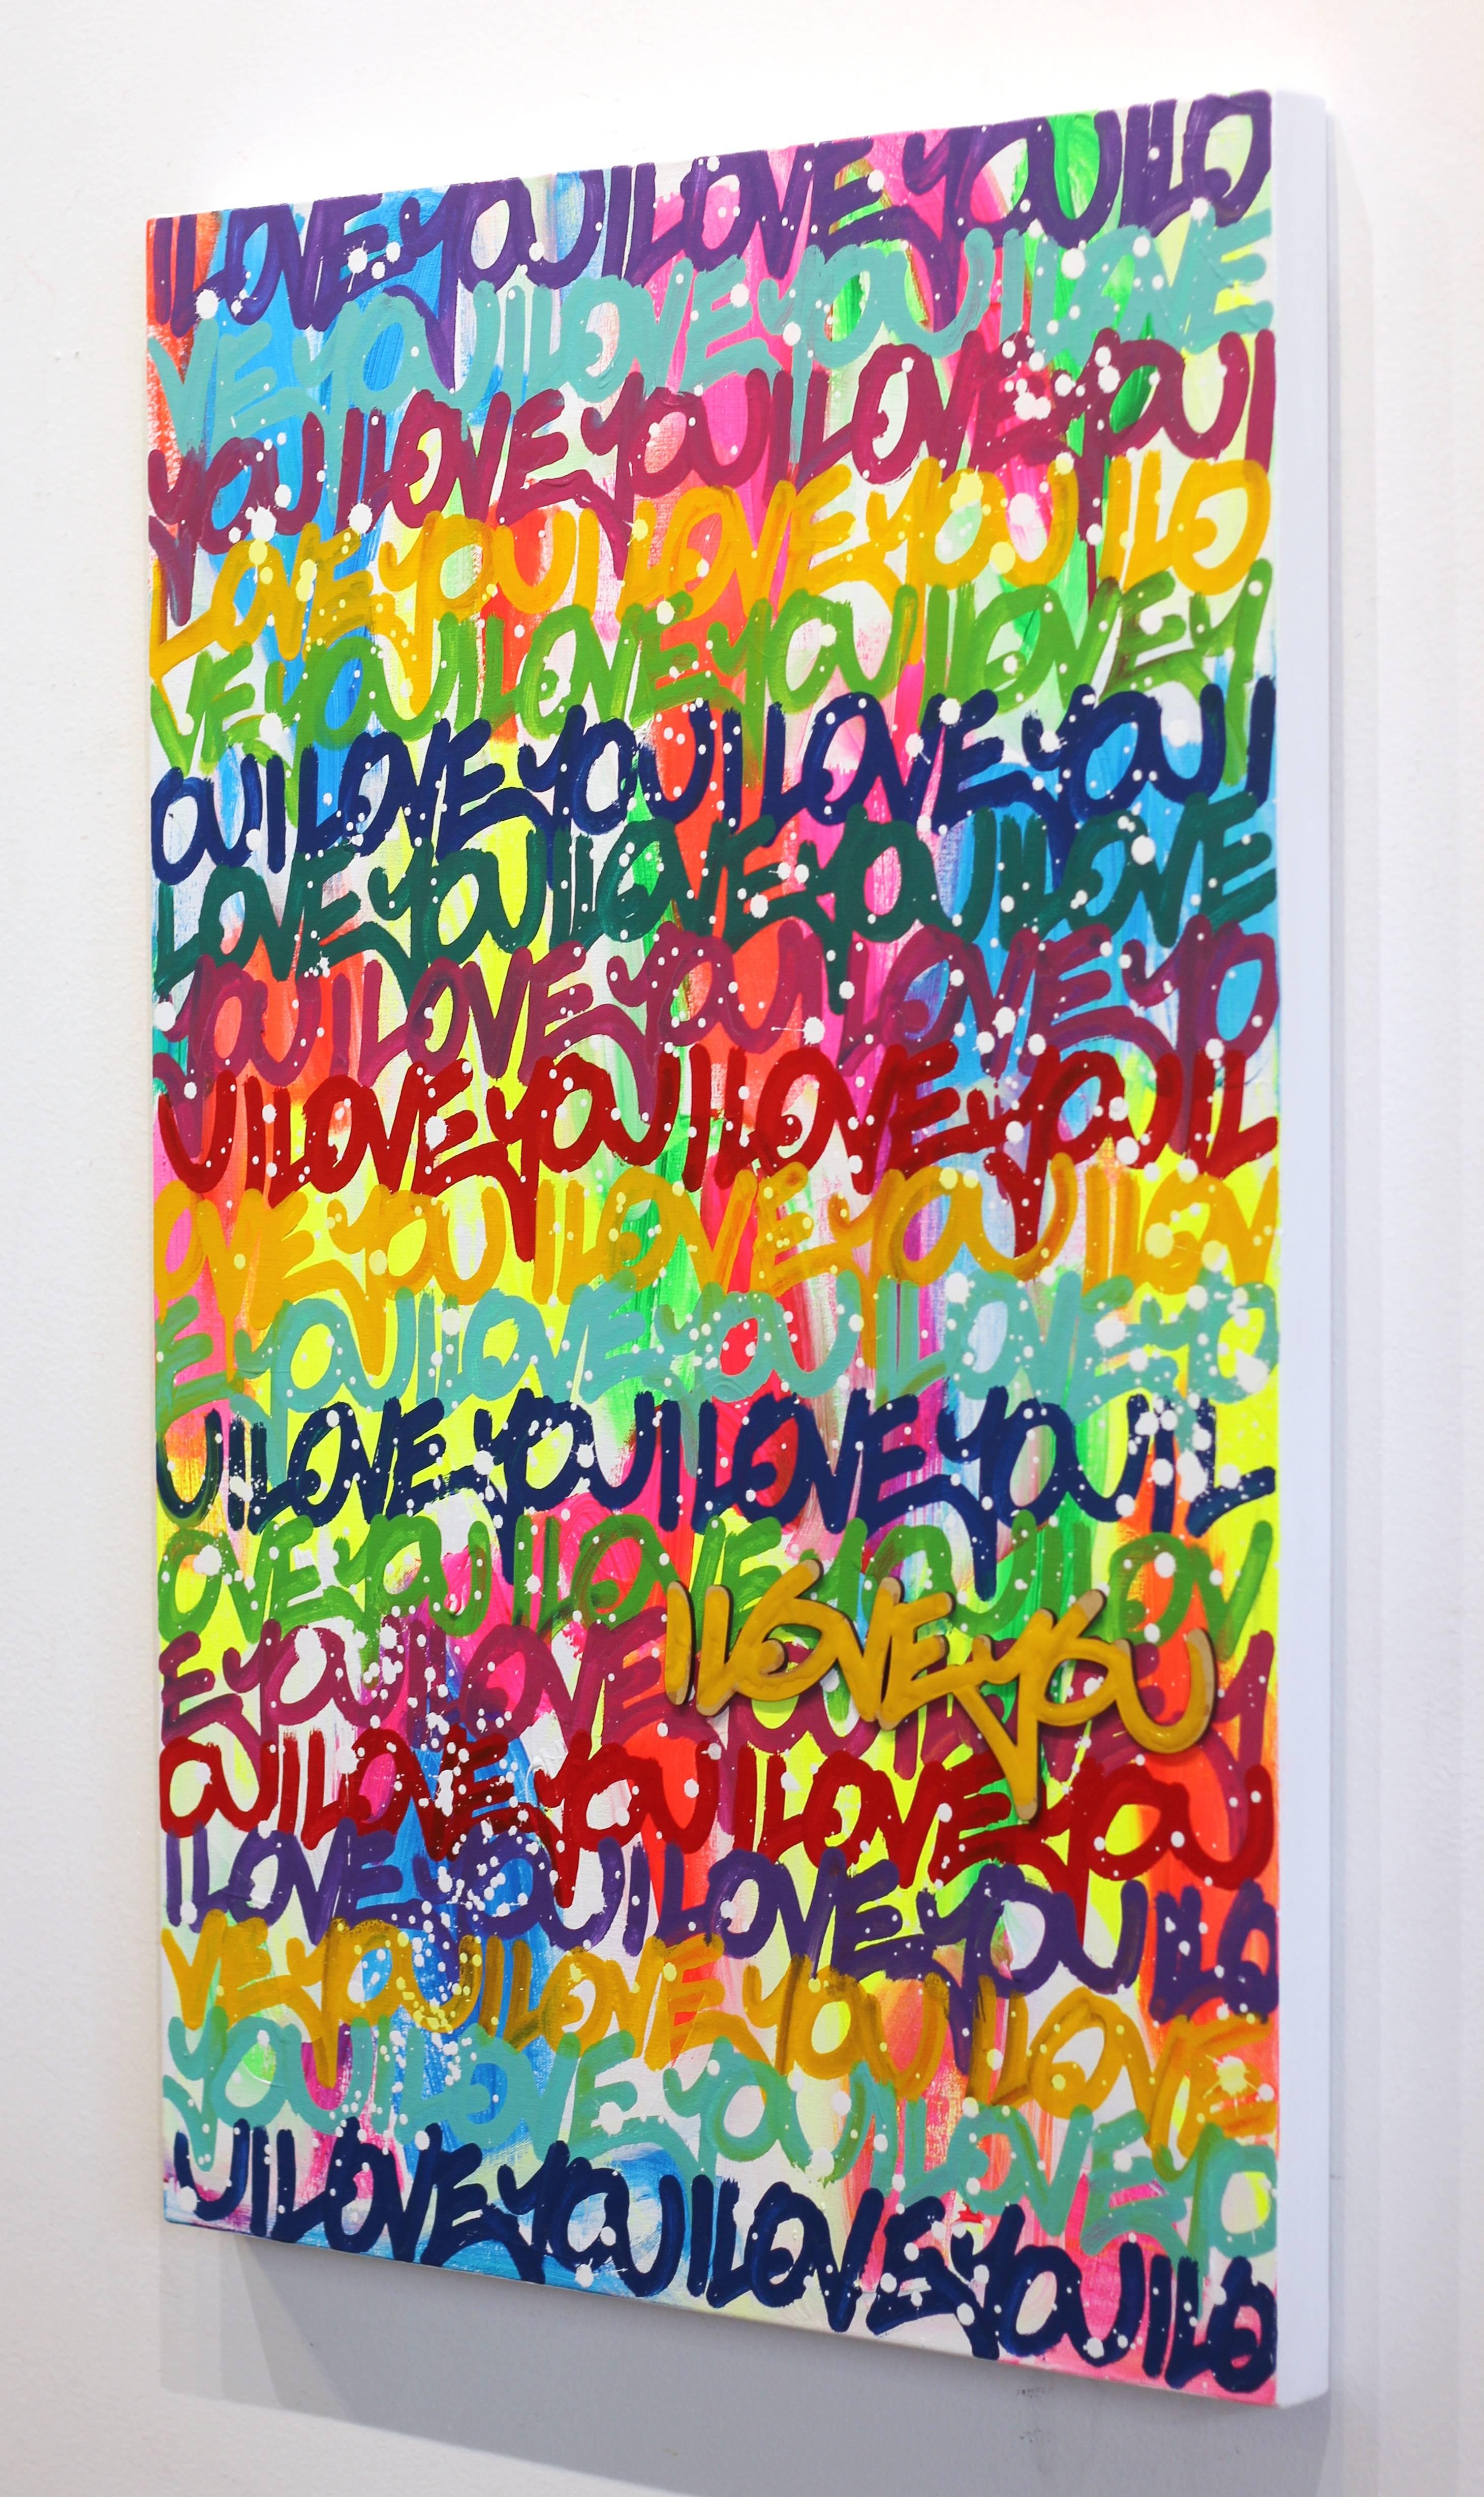 Los Angeles artist Amber Goldhammer paints vibrant, abstract compositions in acrylic on canvas featuring bold blocks of color and energetic brushstrokes. Goldhammer uses her contemporary paintings to express emotions akin to silent poetry while